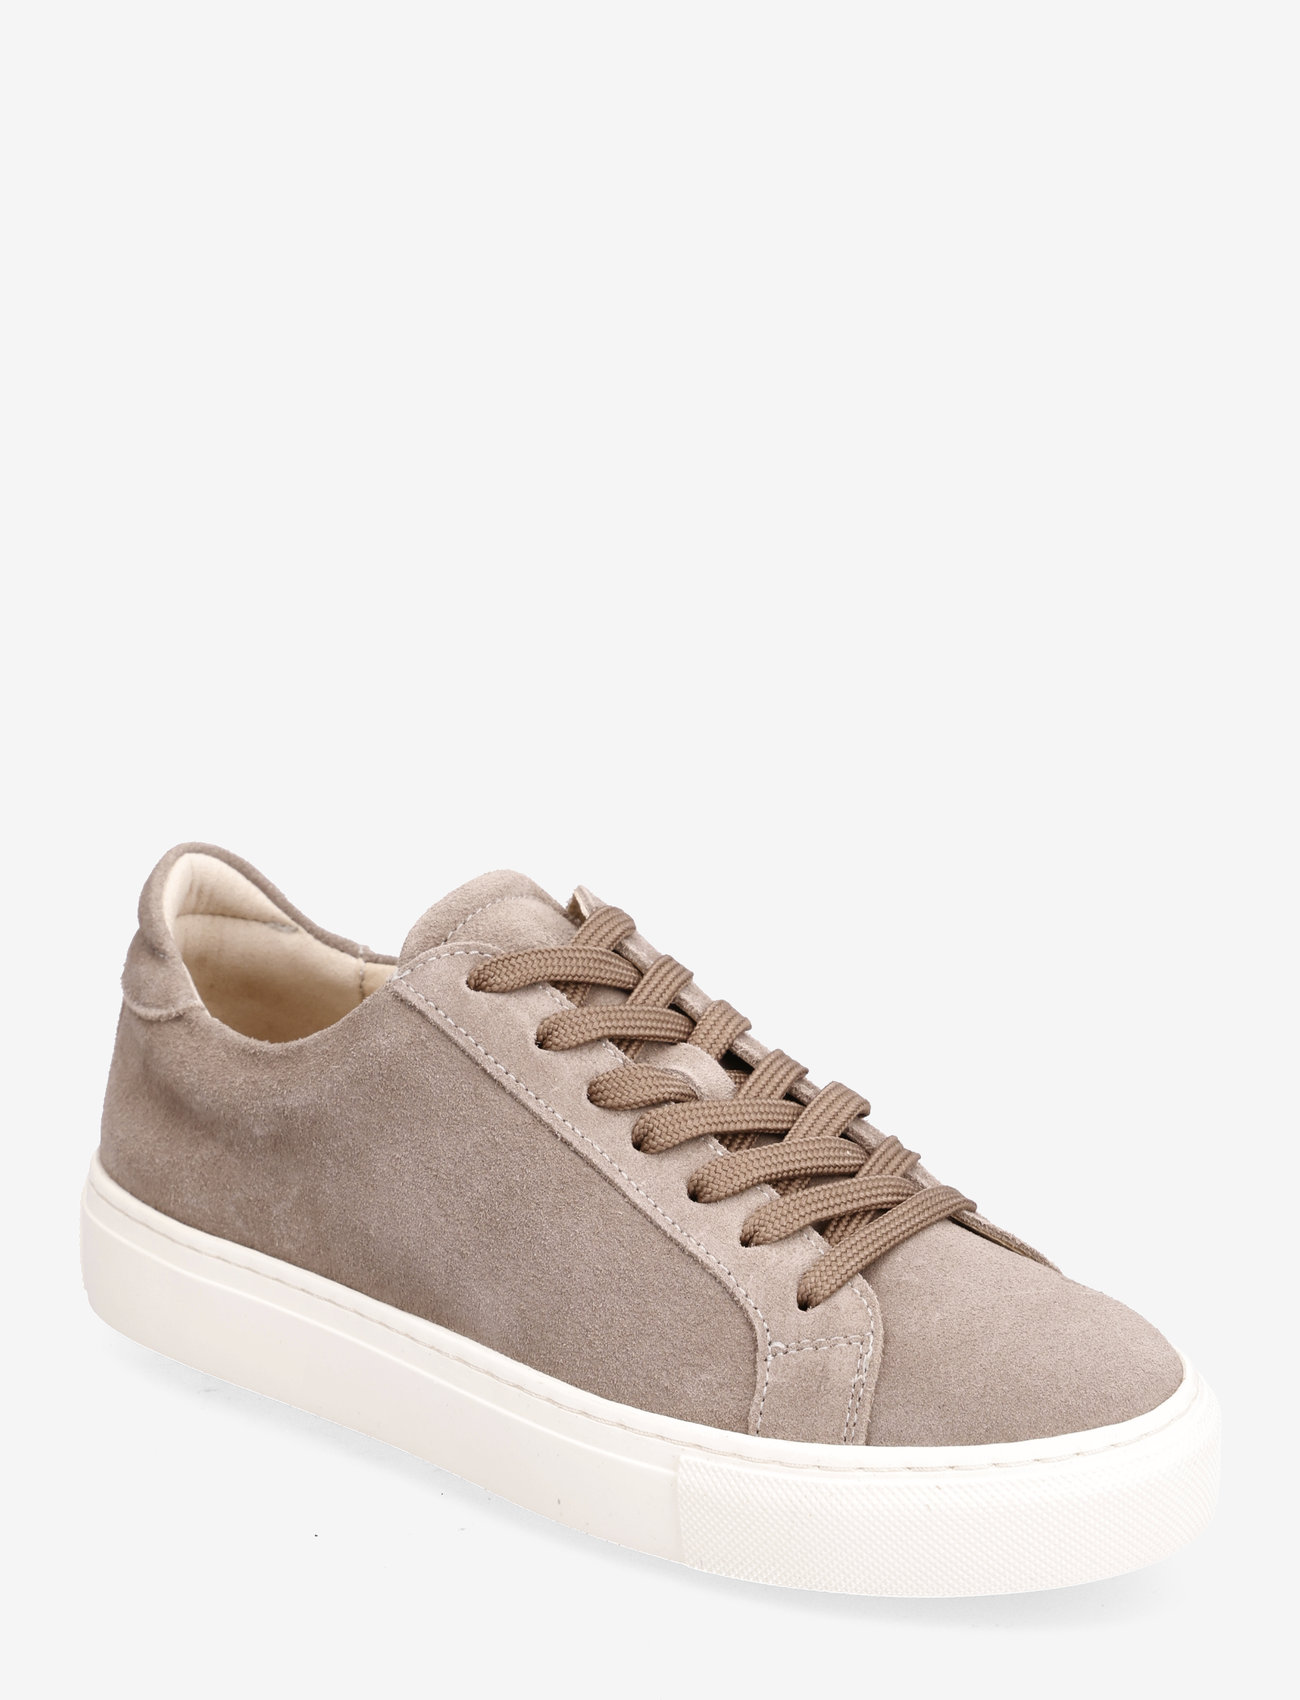 Garment Project - Type - Ardesia Suede - low top sneakers - ardesia - 0